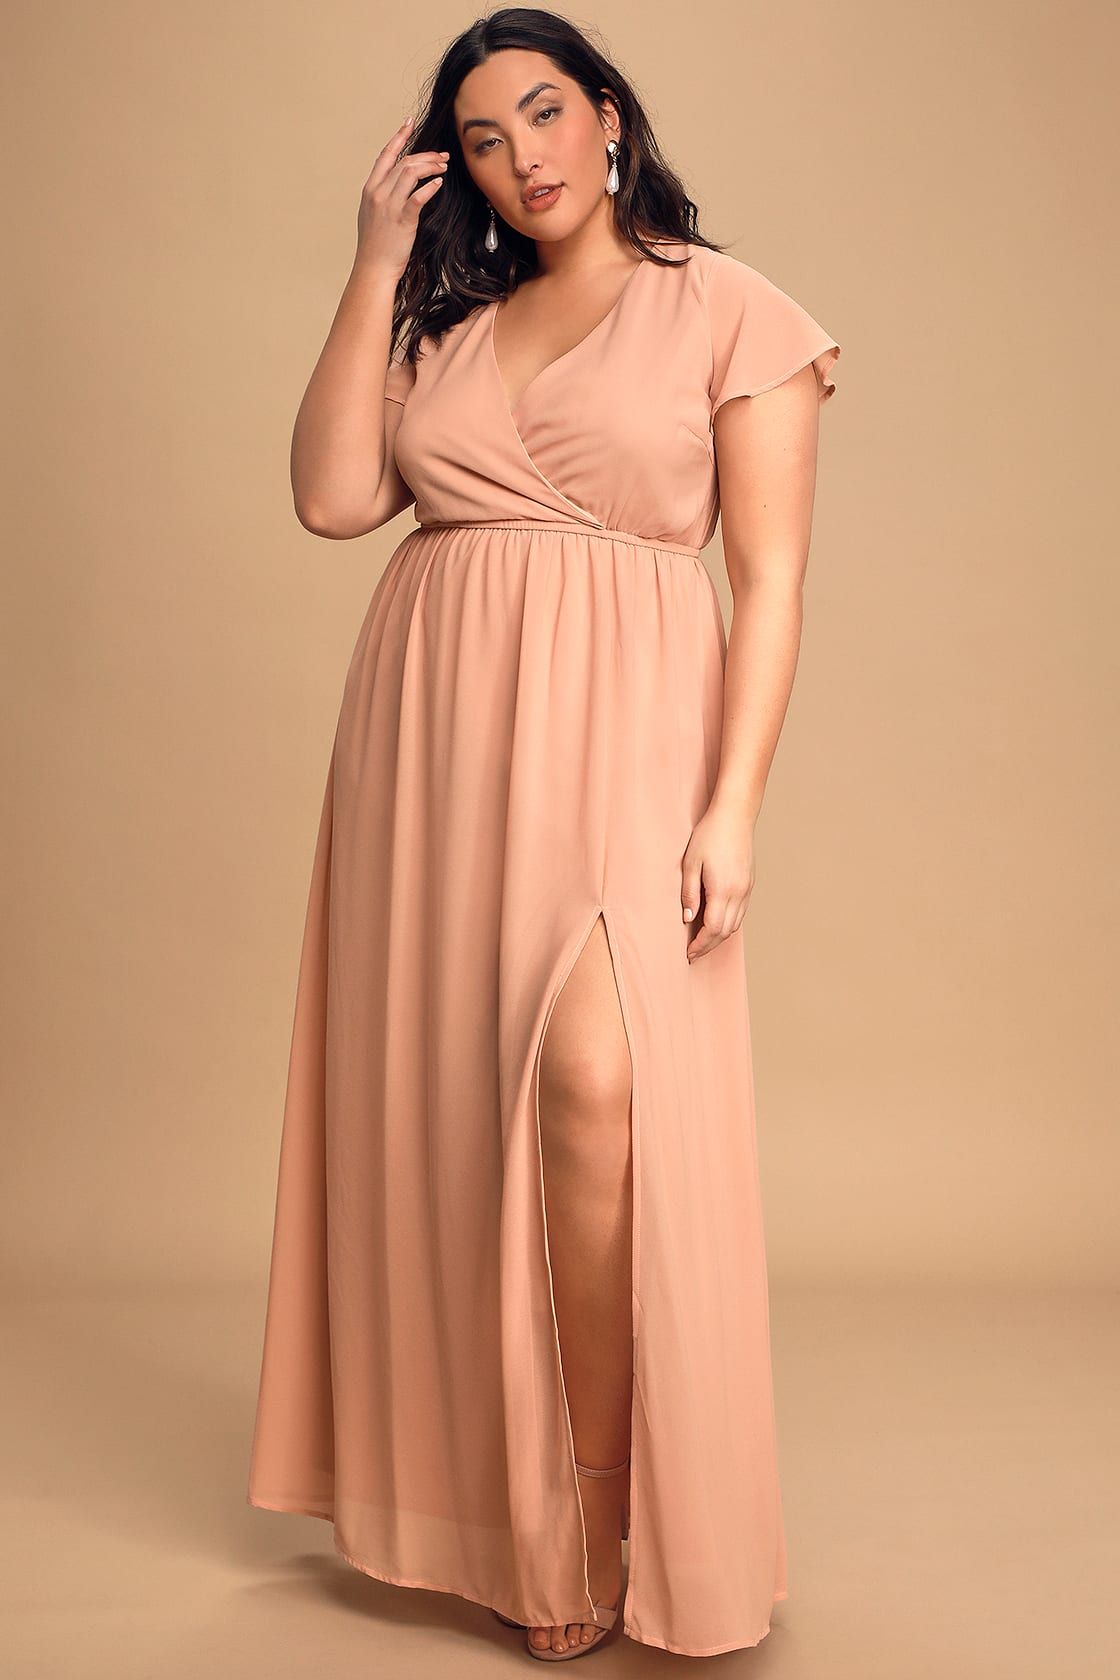 Lost in the Moment Blush Maxi Dress | Lulus (US)